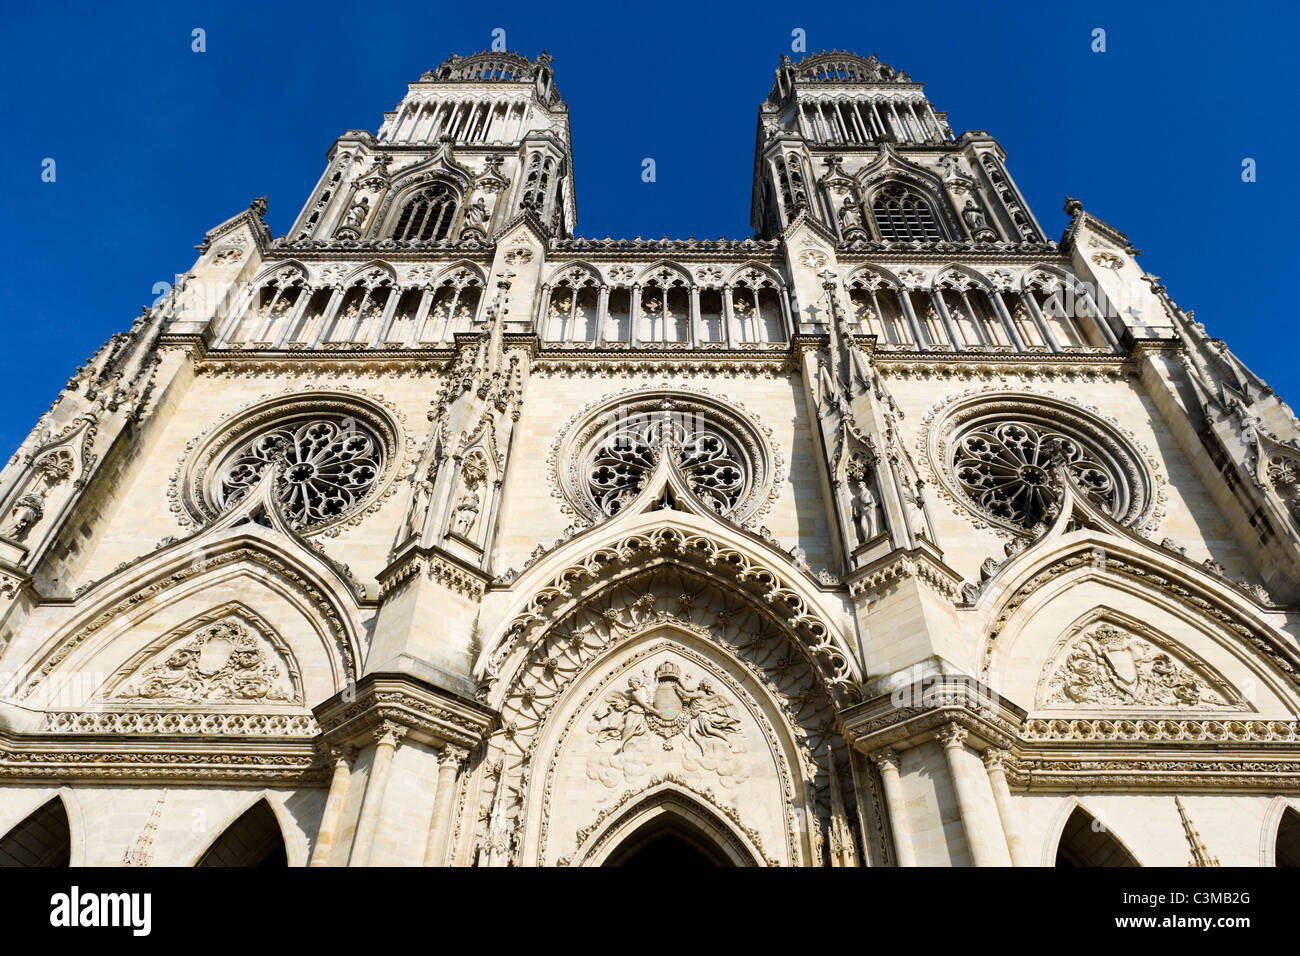 The facade of Orleans Cathedral (Cathedrale Sainte Croix d'Orleans), Orleans, France Stock Photo